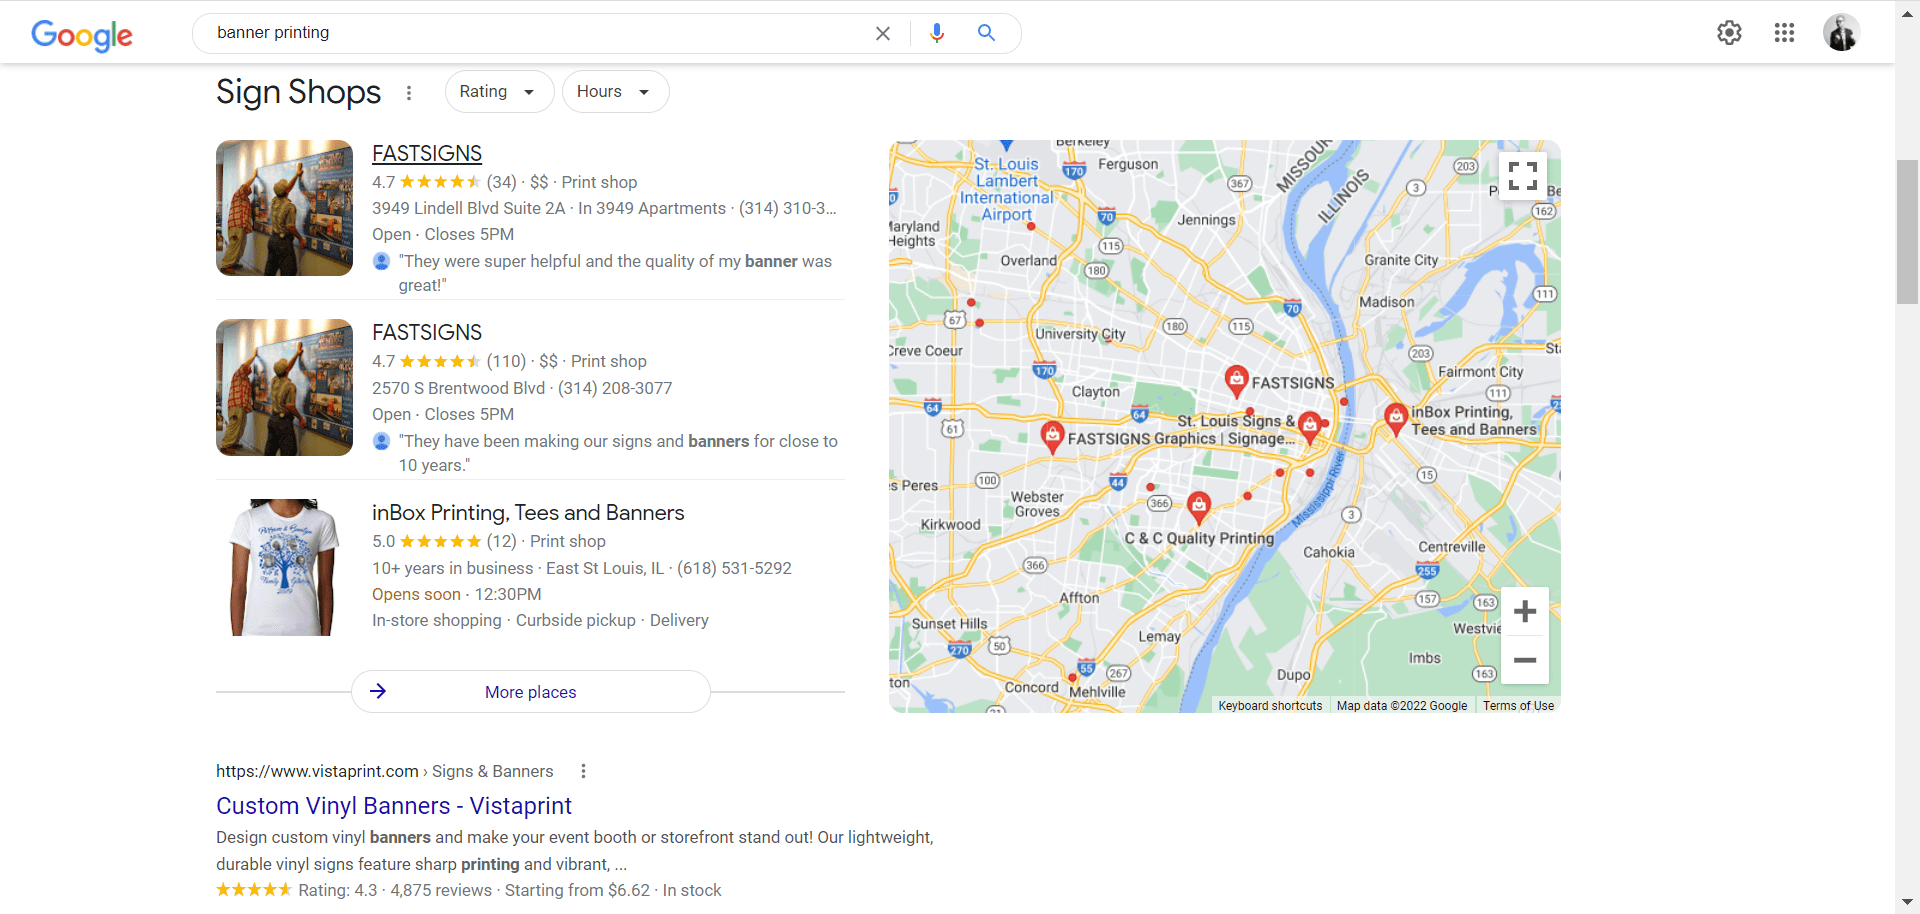 banner printing search results